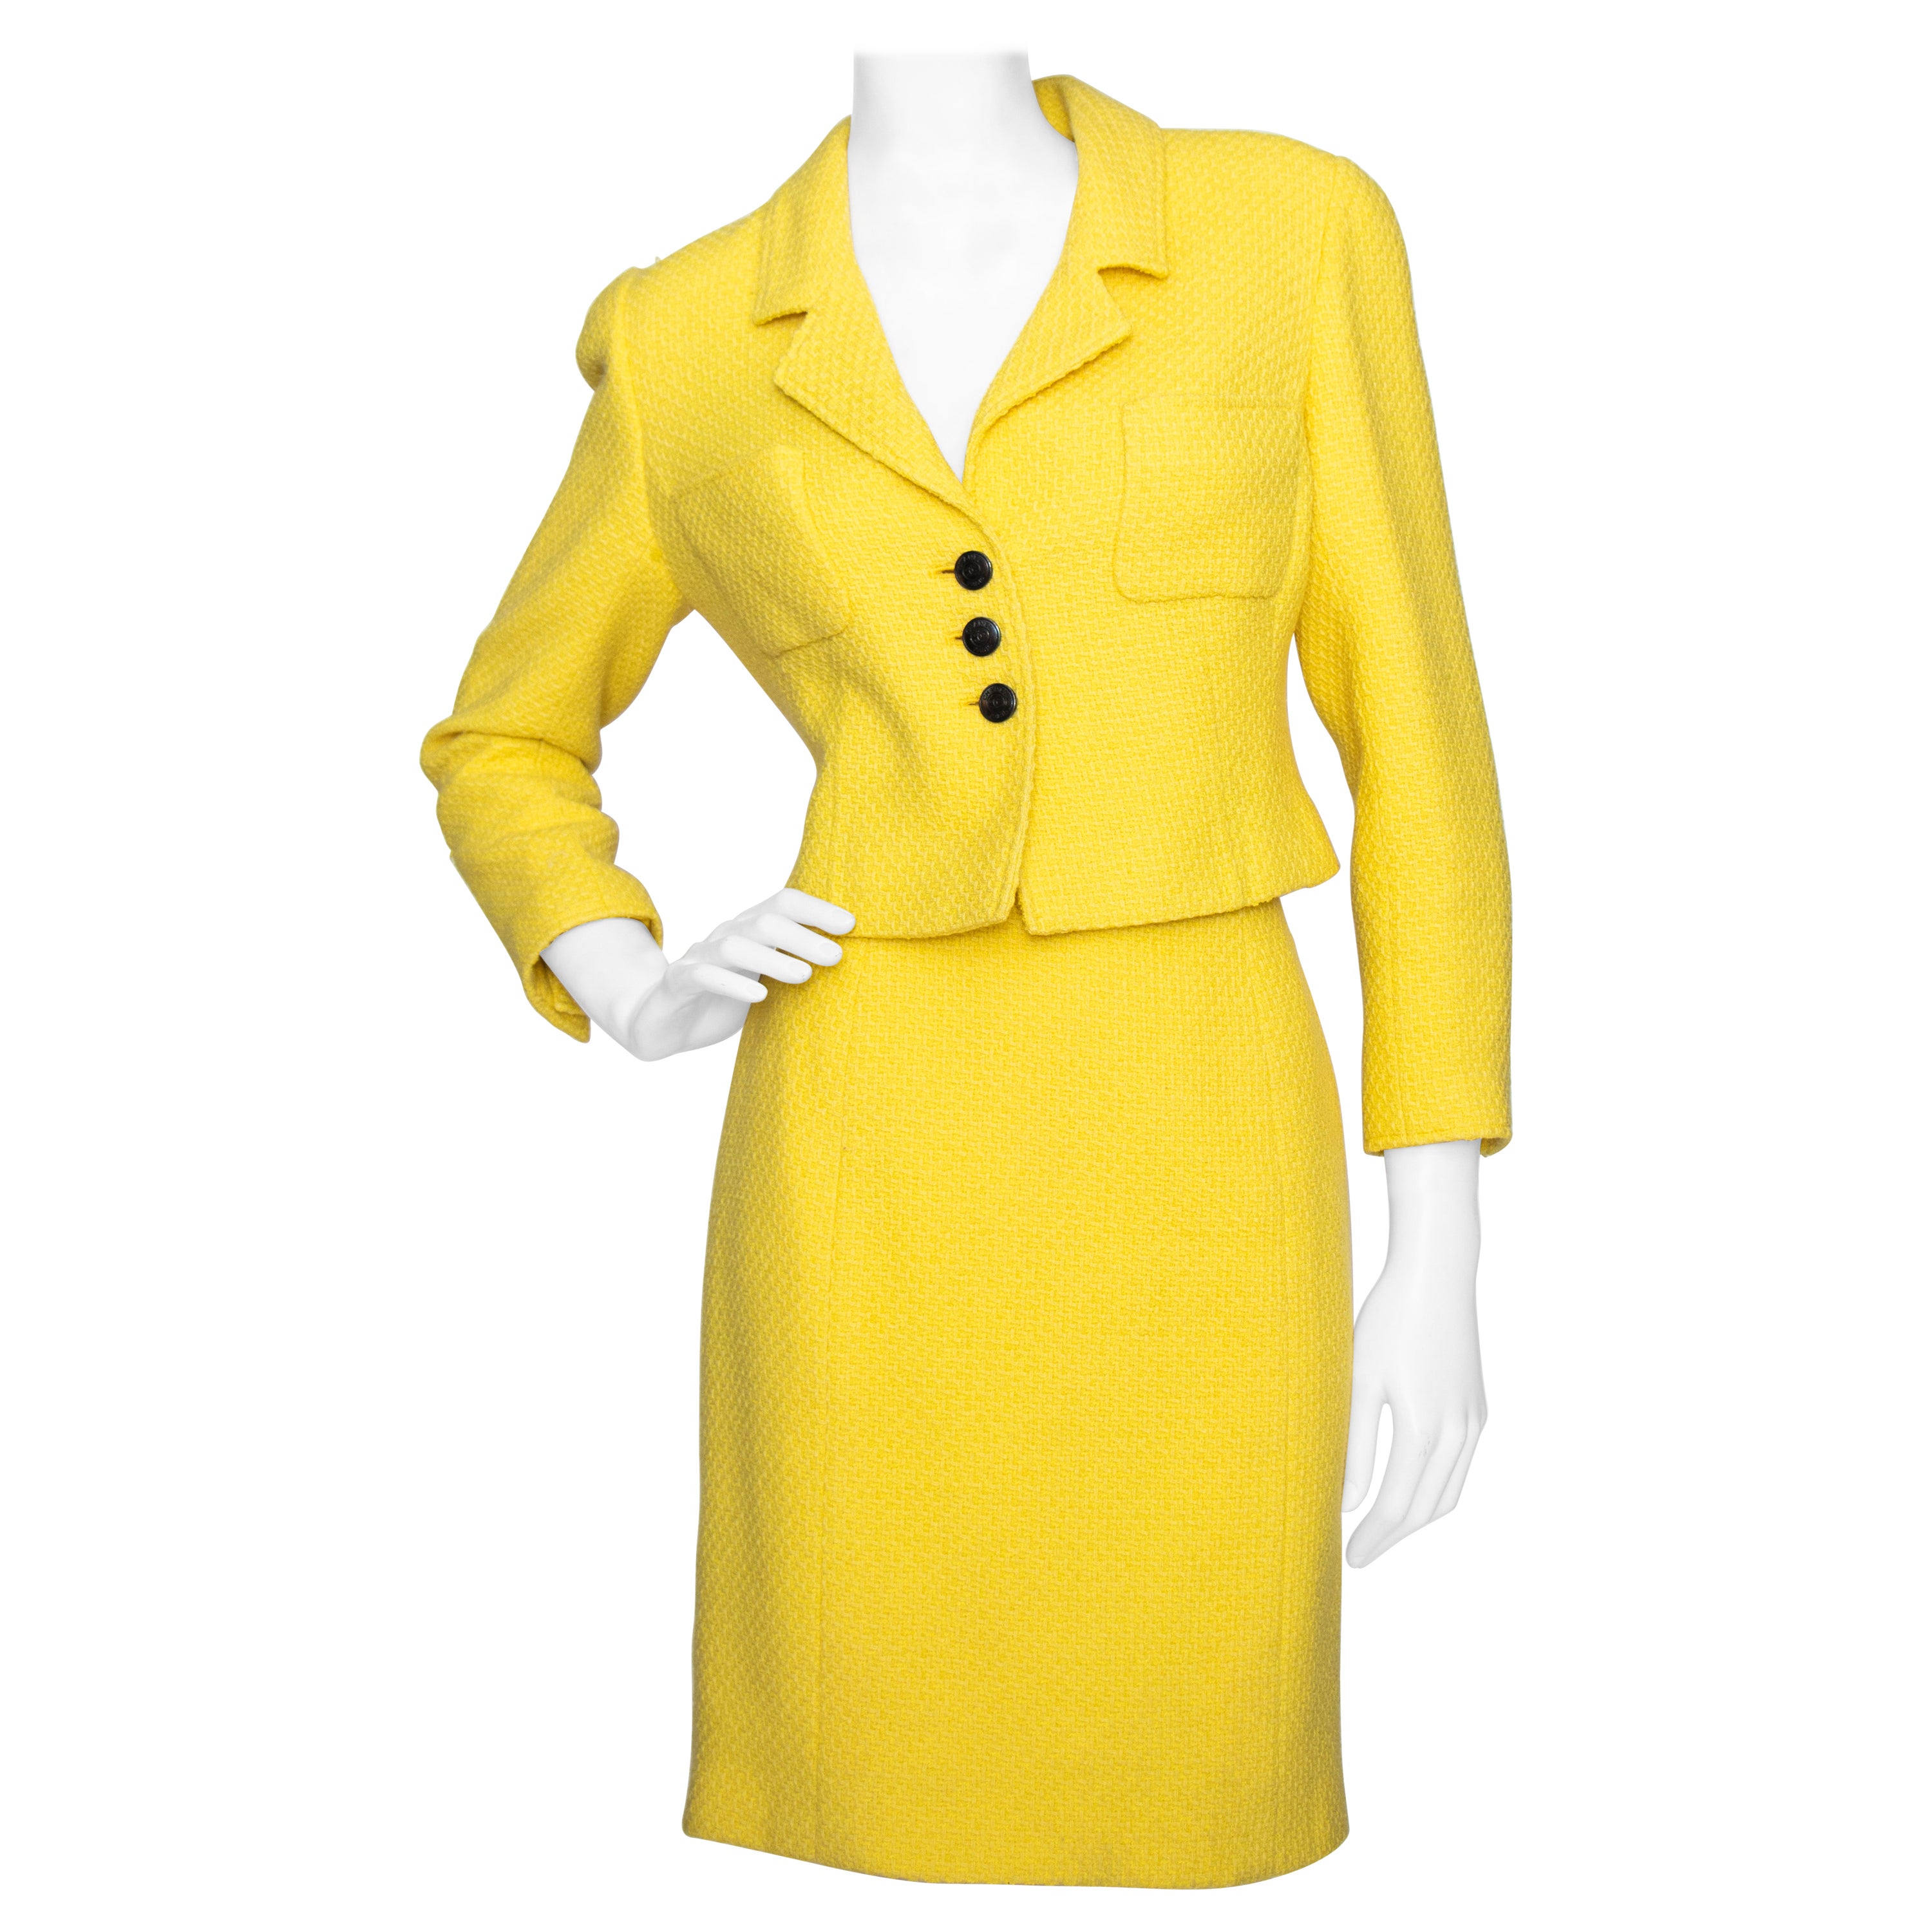 1960s Jackie O Mod Style Butter Yellow Knubby Knit 2 Piece Skirt Suit ...